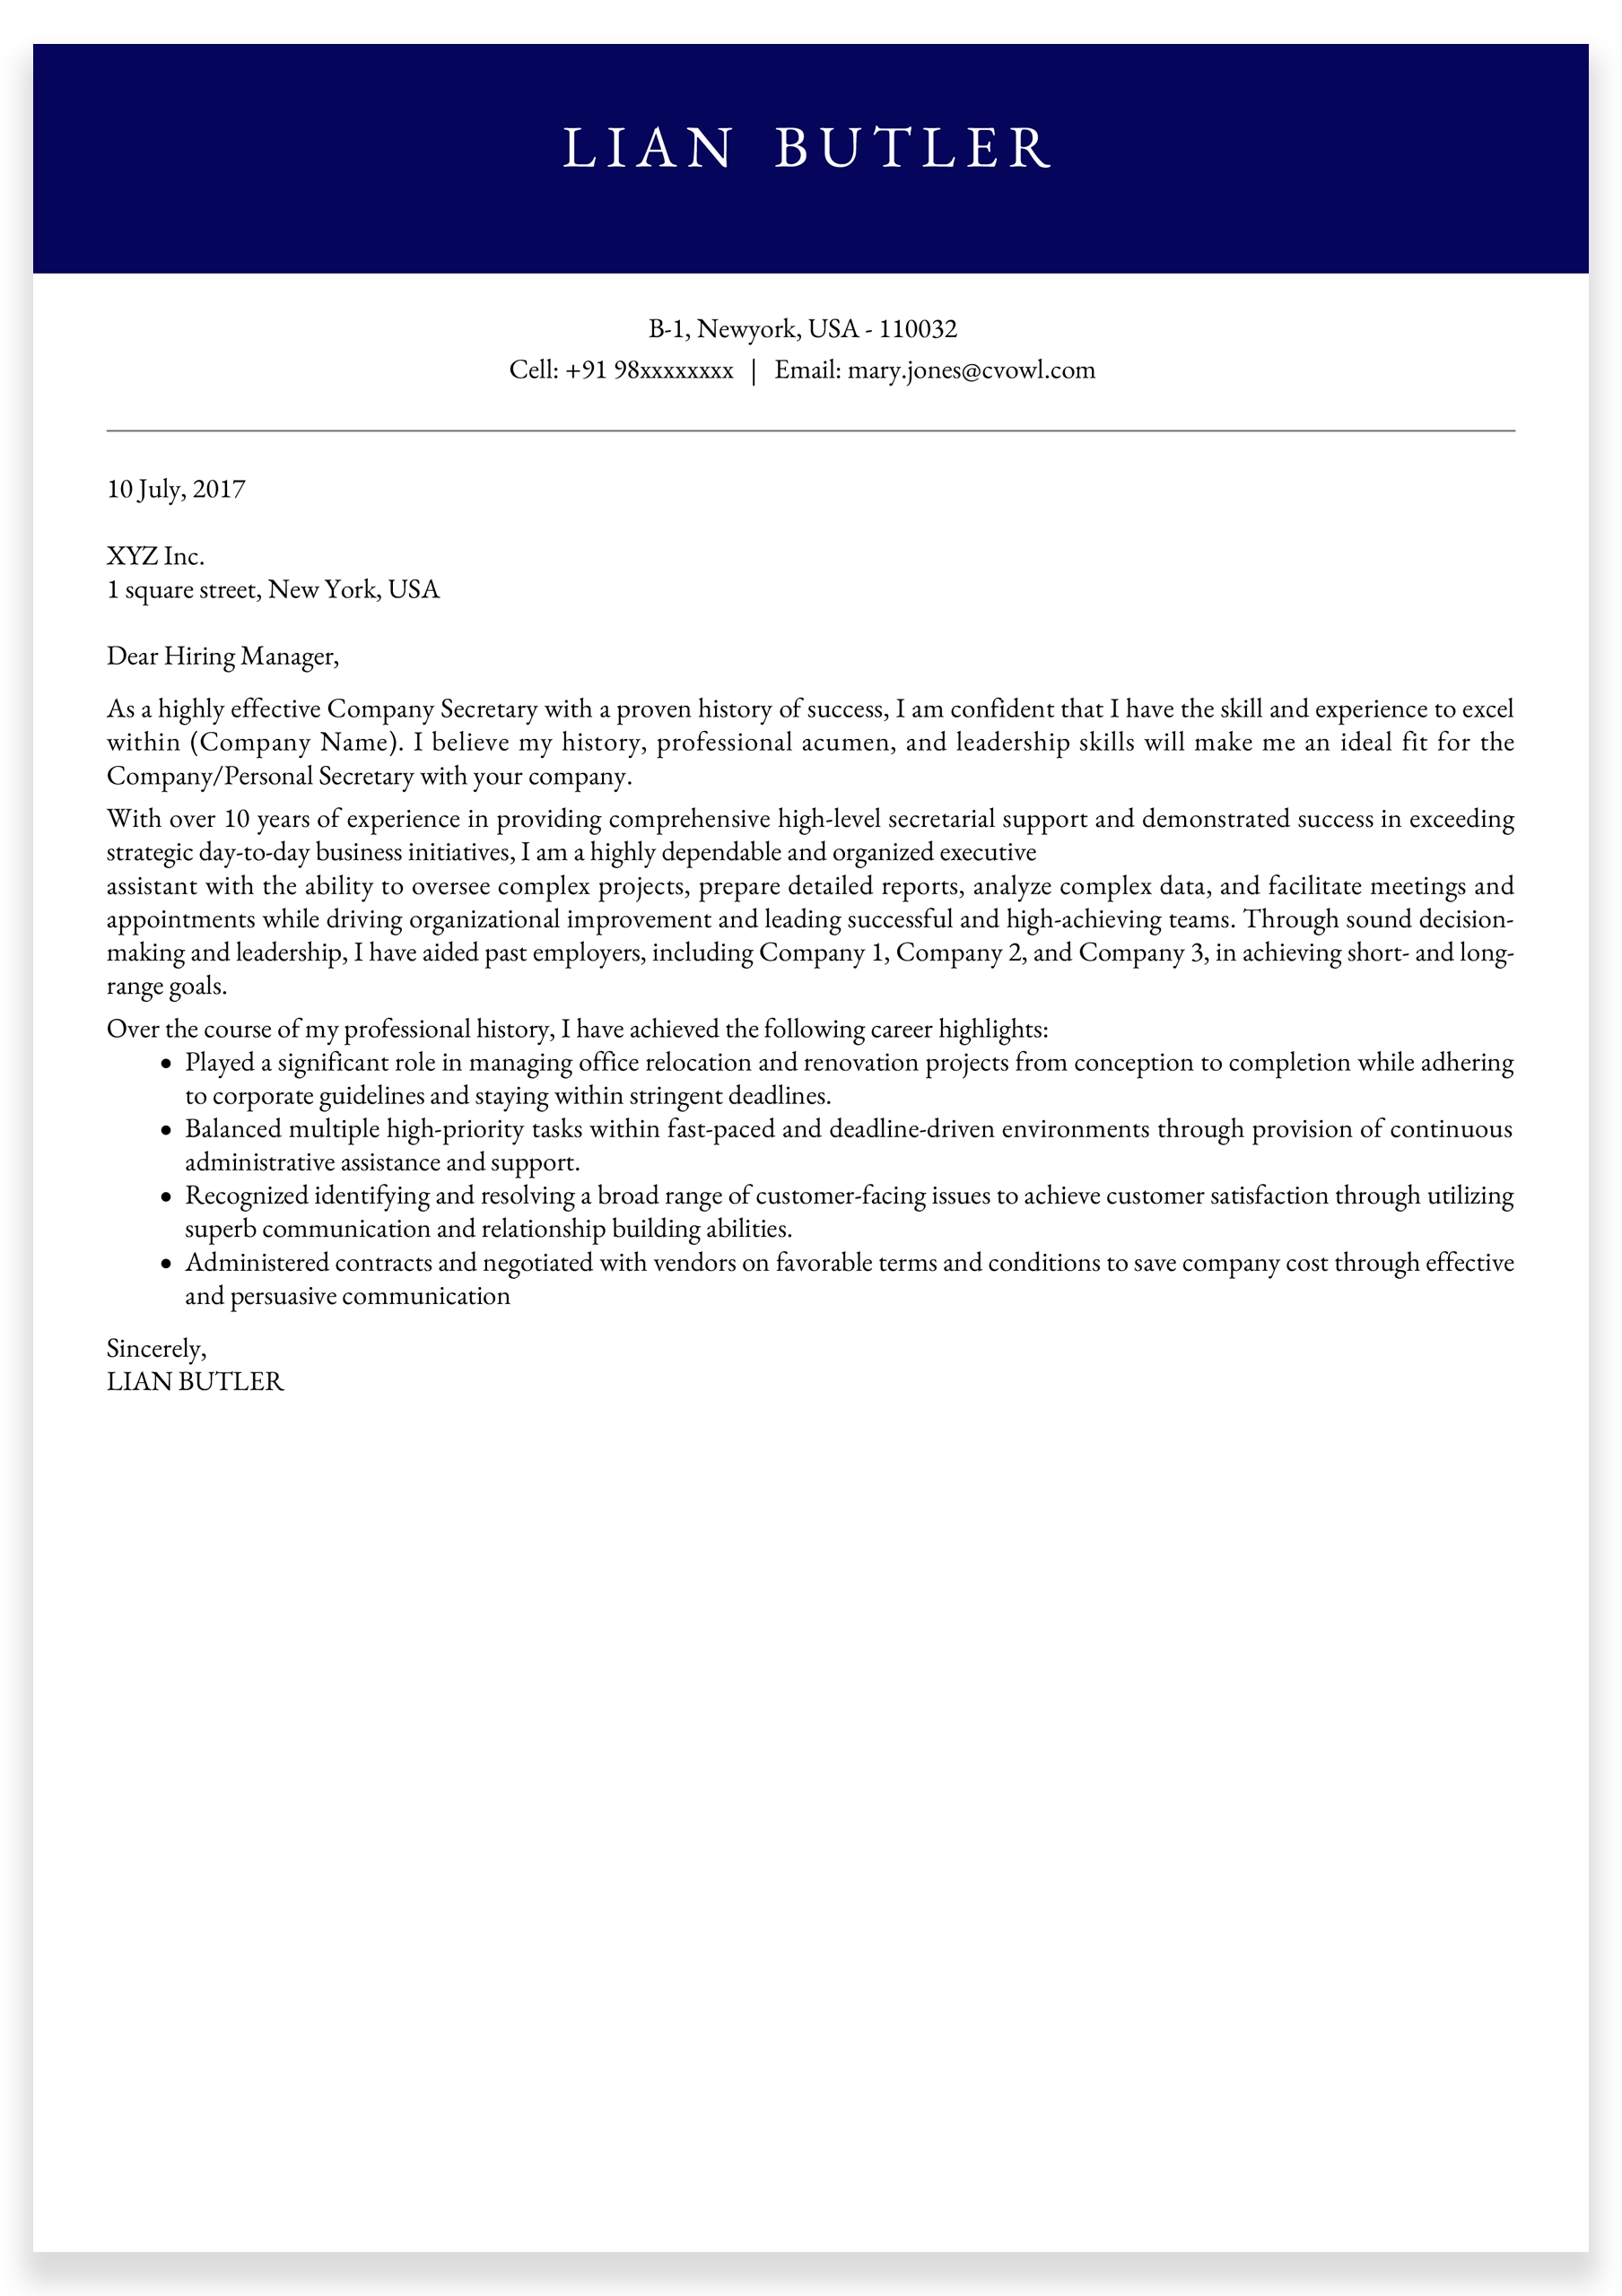 Civil-Structural-Engineer-Cover-Letter-sample8